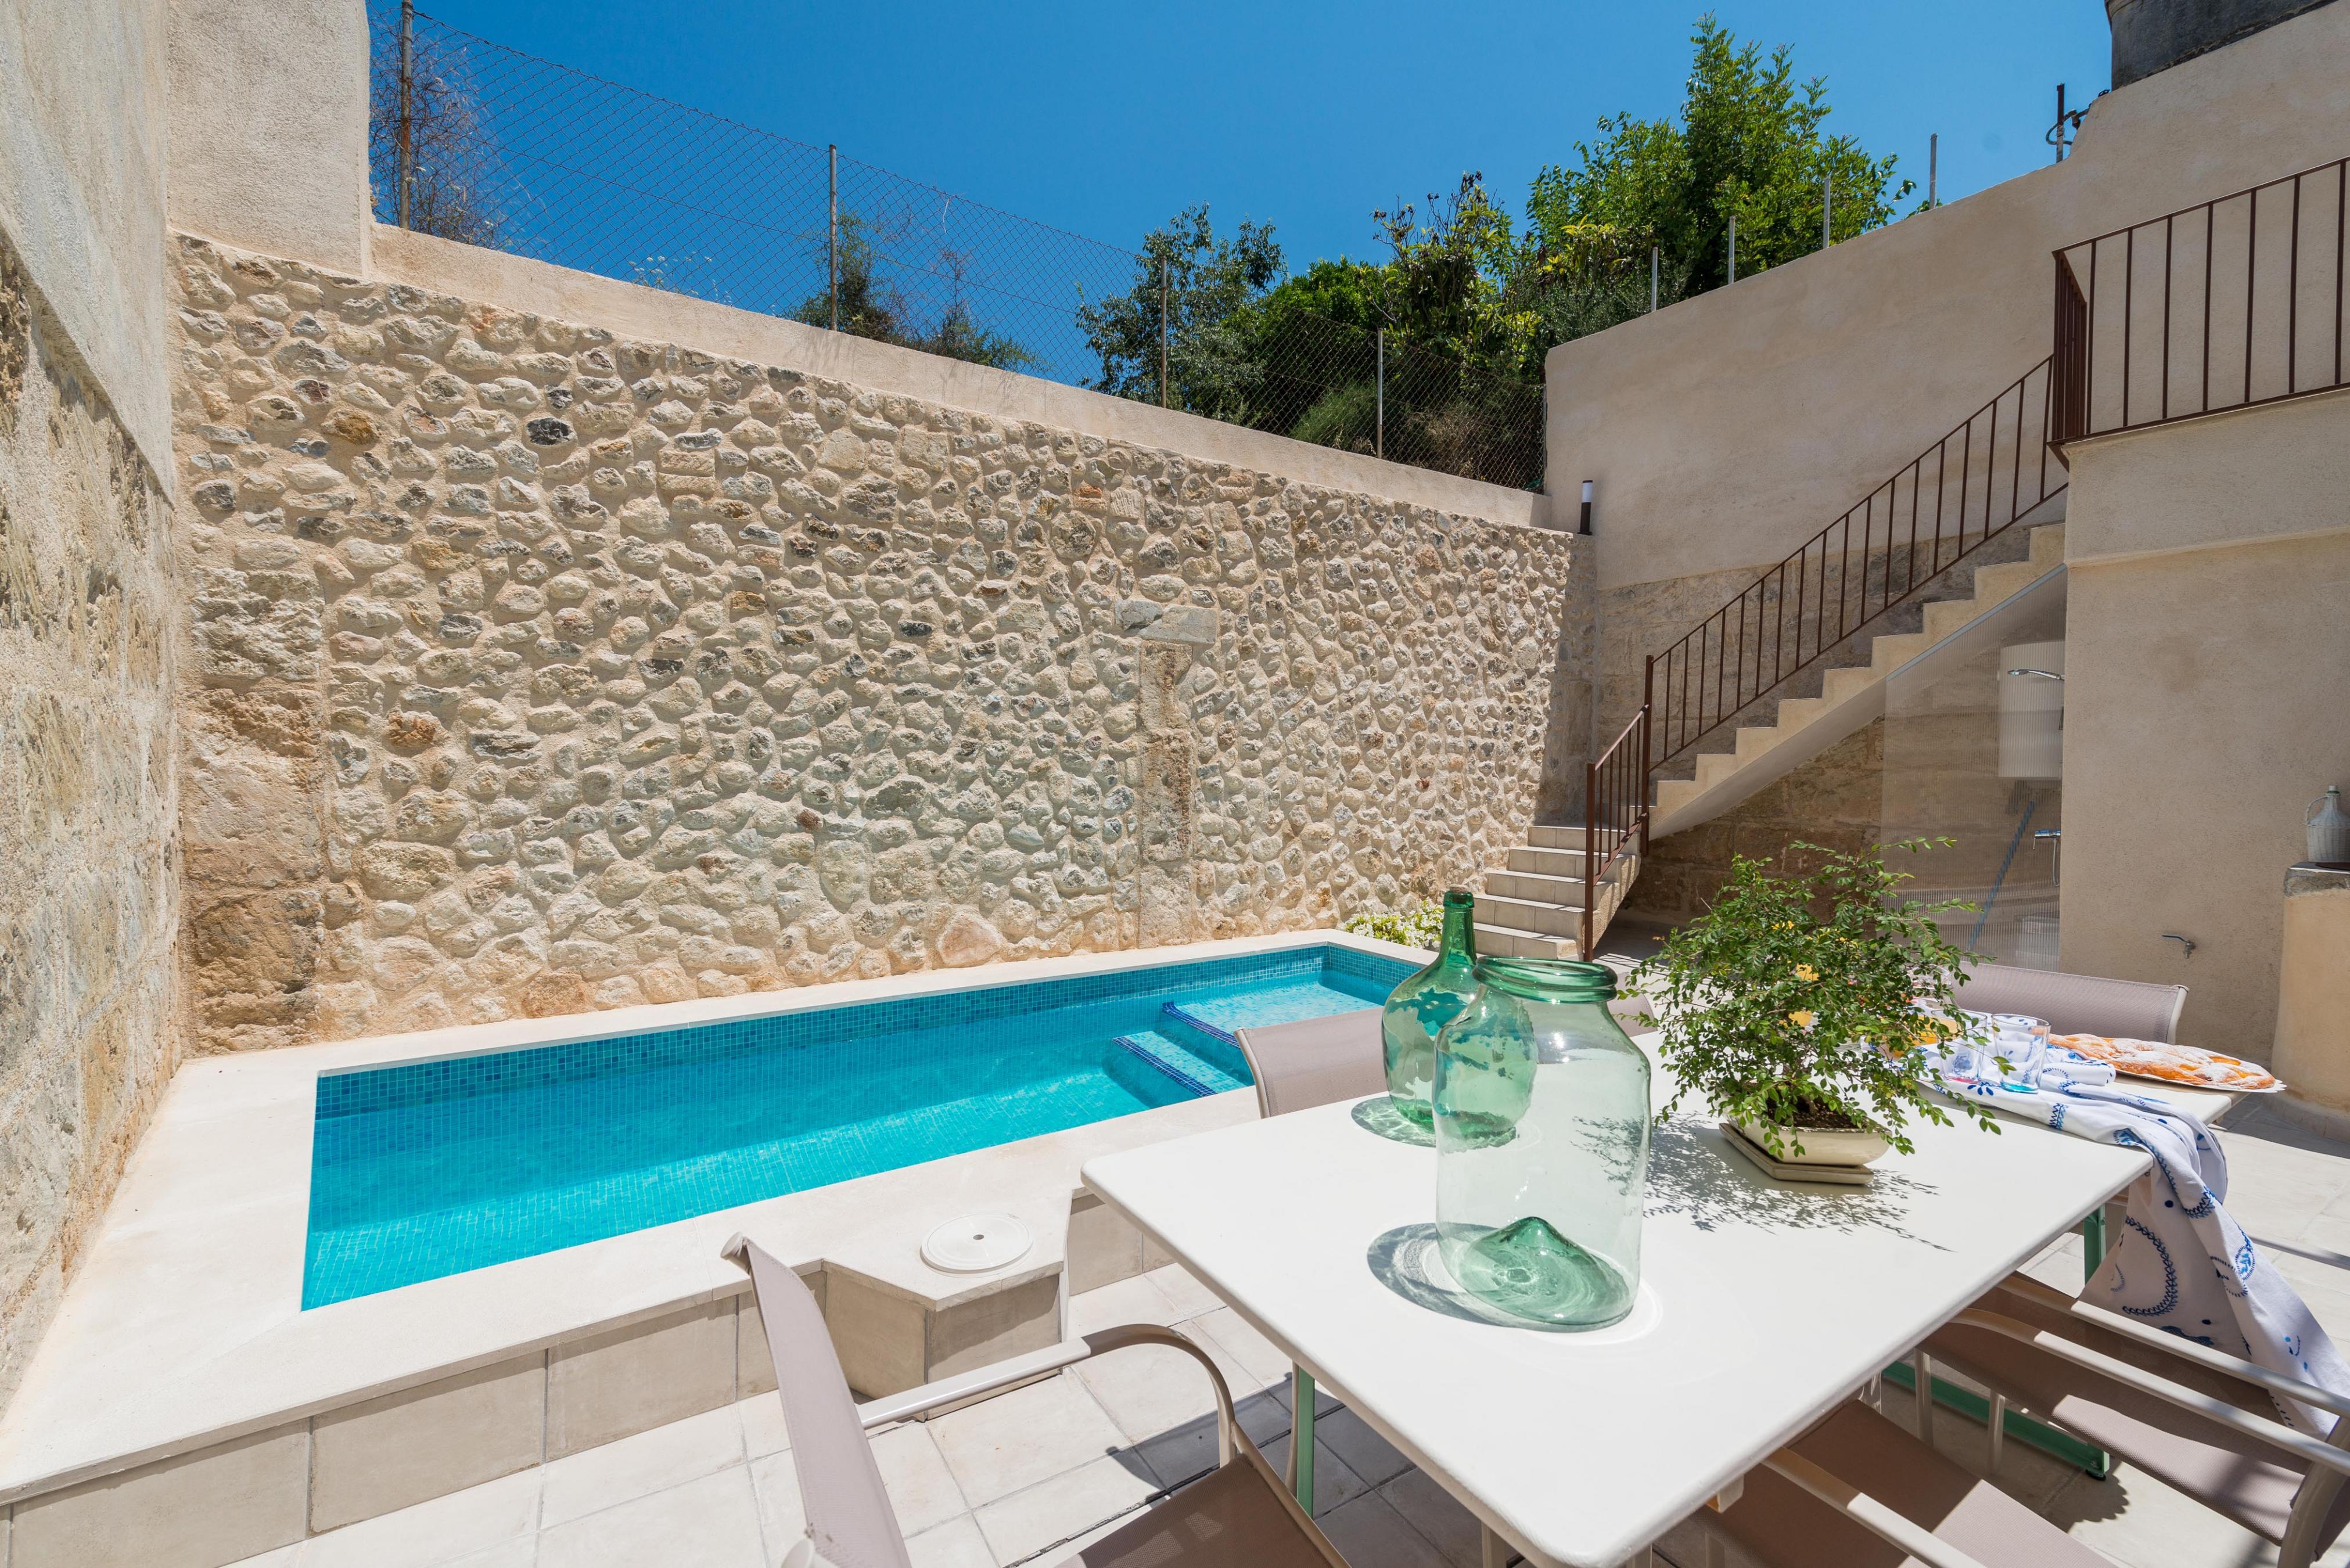 Property Image 1 - CAN DIANA - Vacation home with private pool in peaceful town. Free WiFi